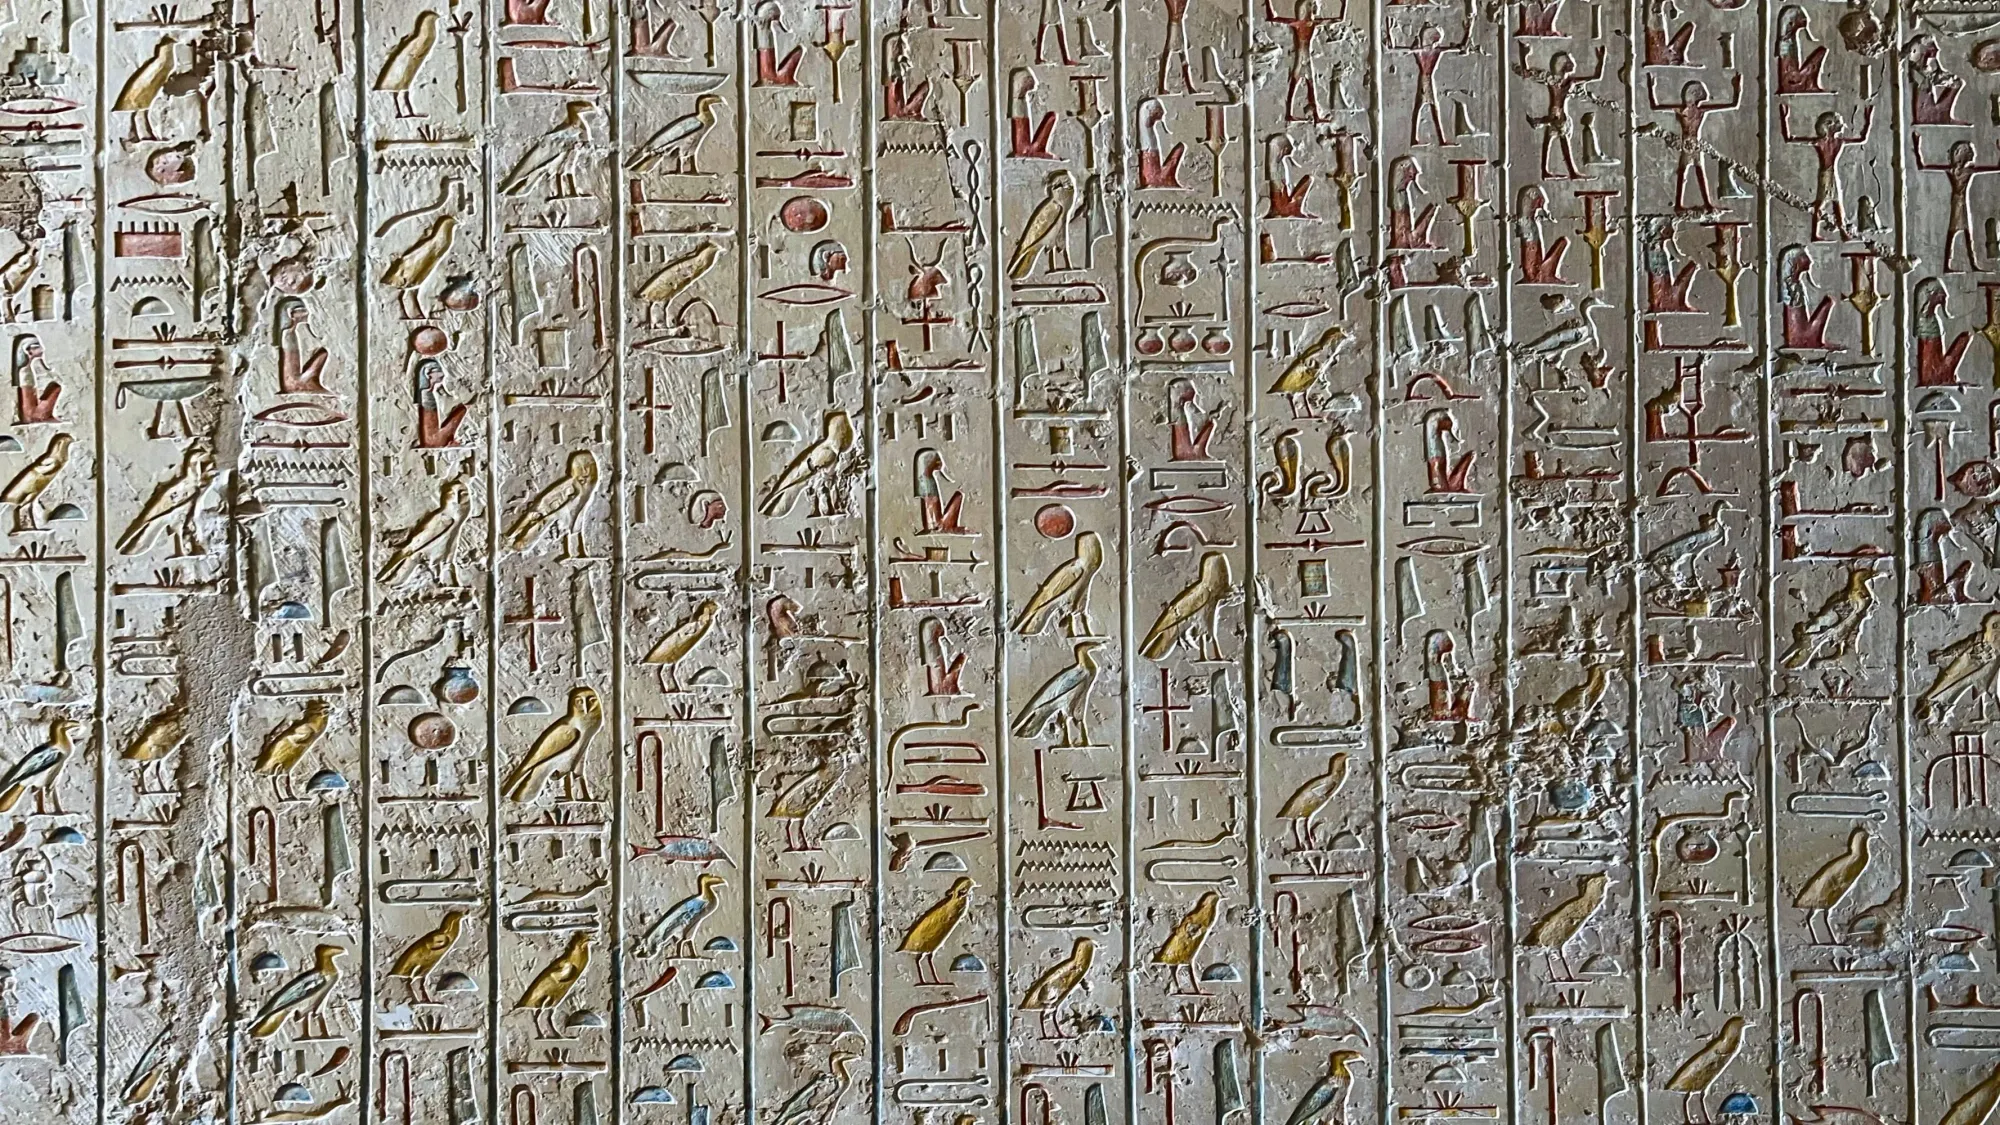 White wall with painted hieroglyphics in yellows, reds, and blues